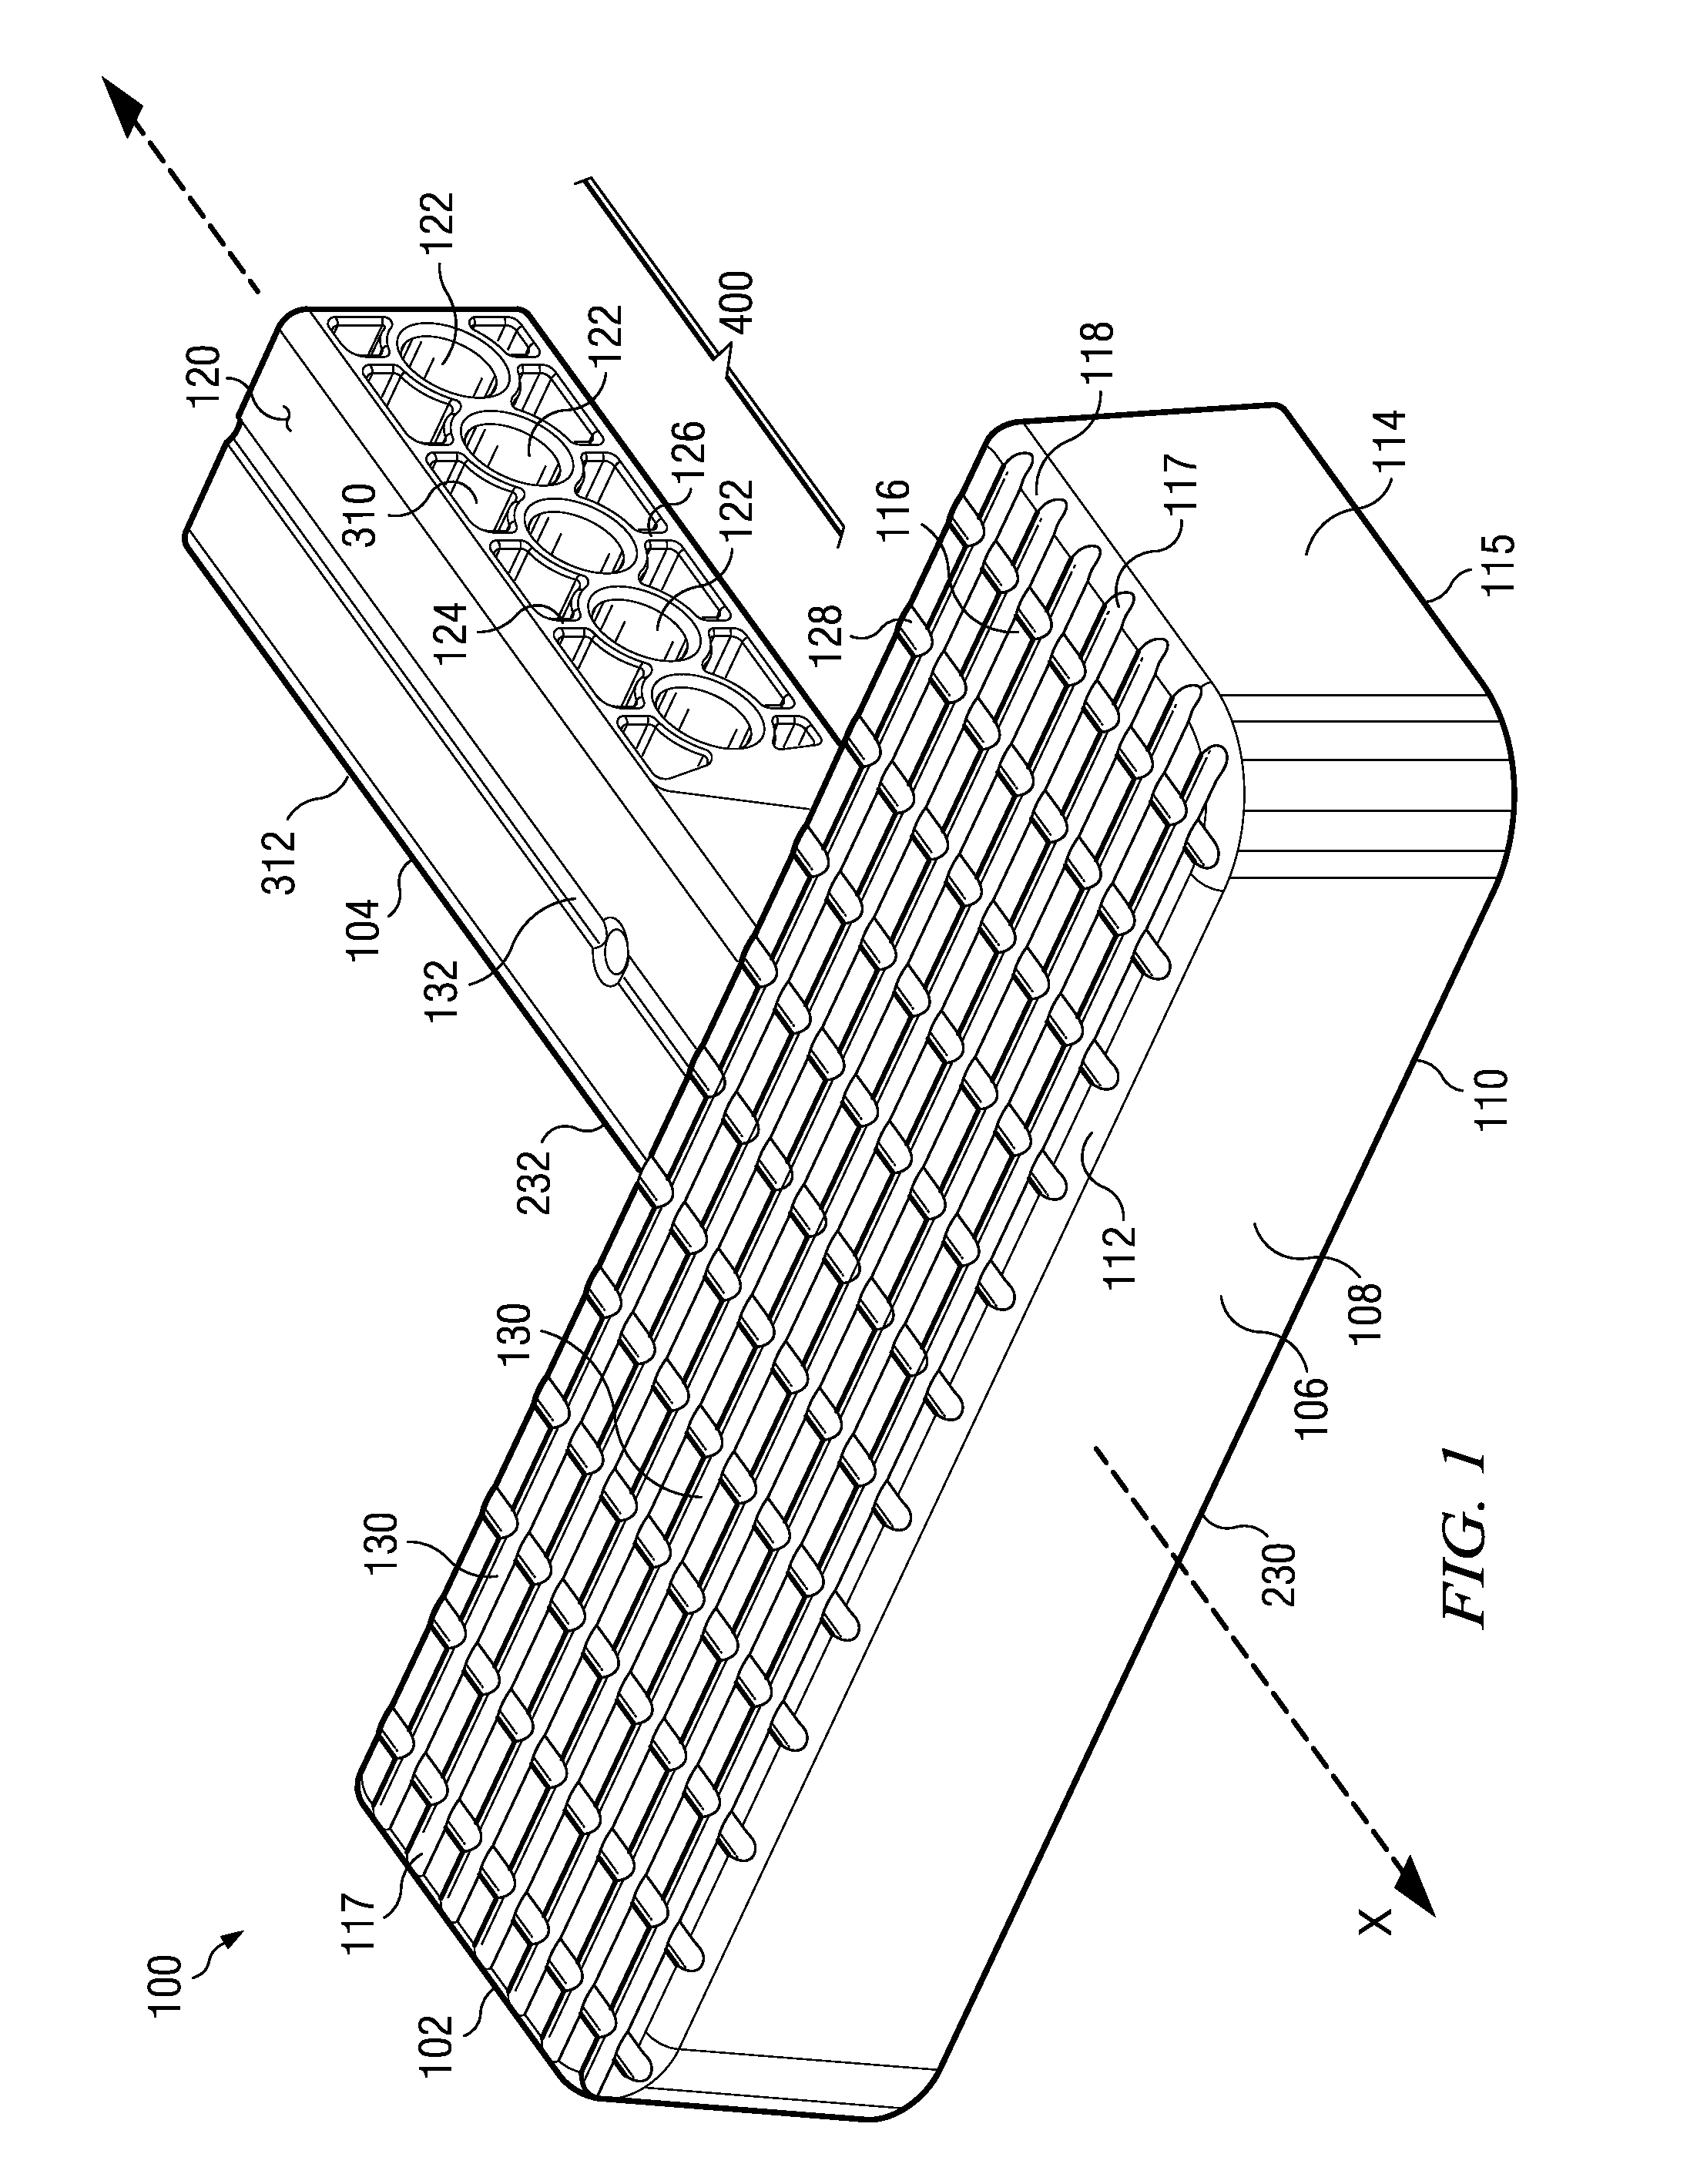 Integrally molded polymer hitch step